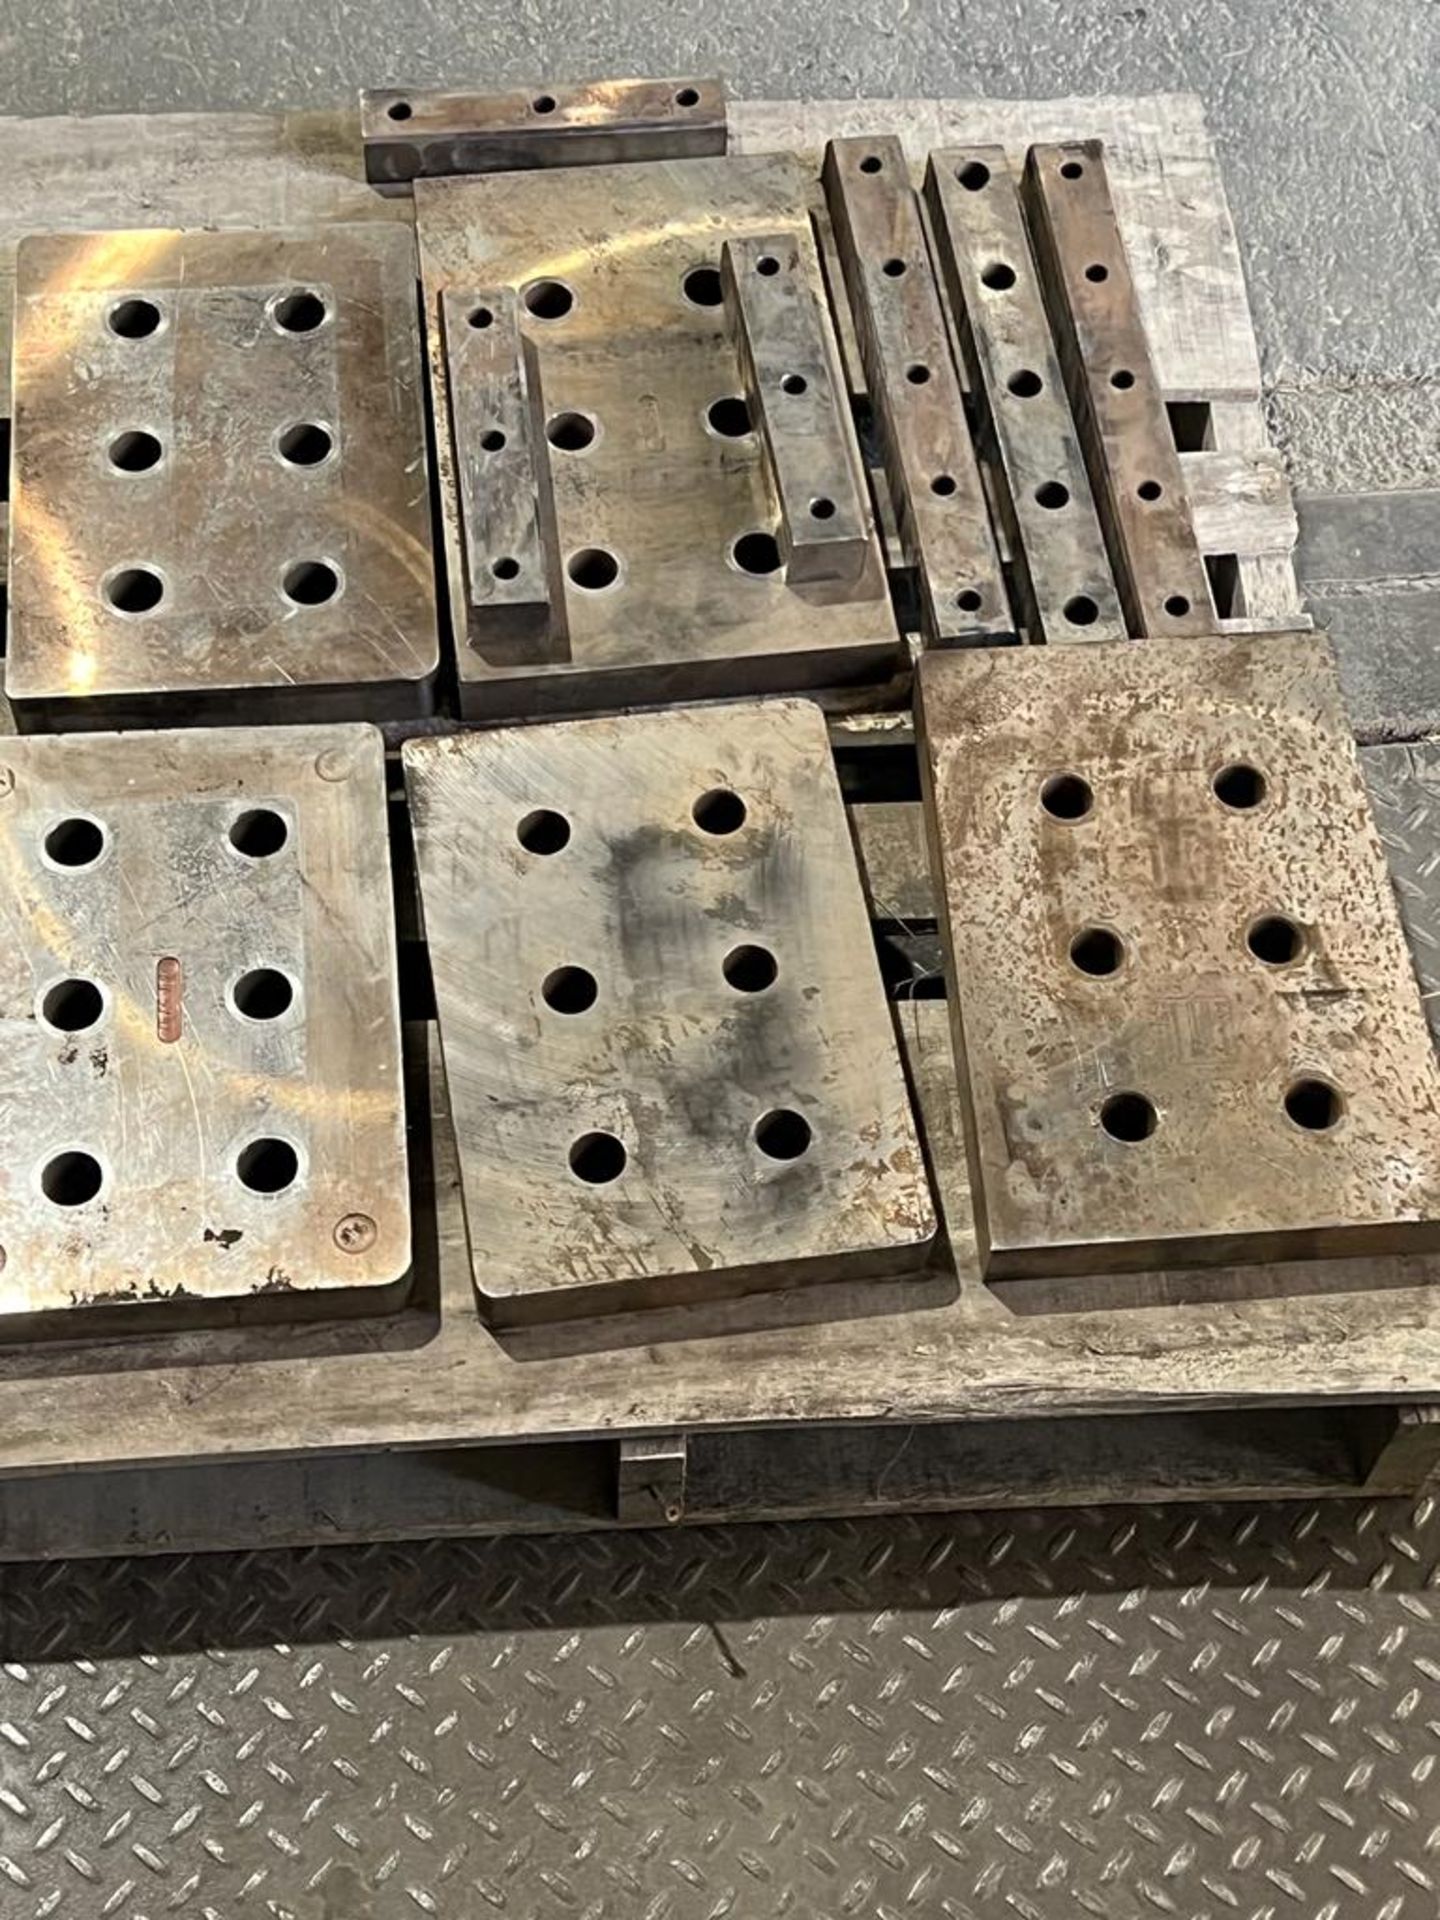 Lot of Ironworker Blades - Some Nice MINT UNITS AM6599, AM5797 - Image 2 of 3